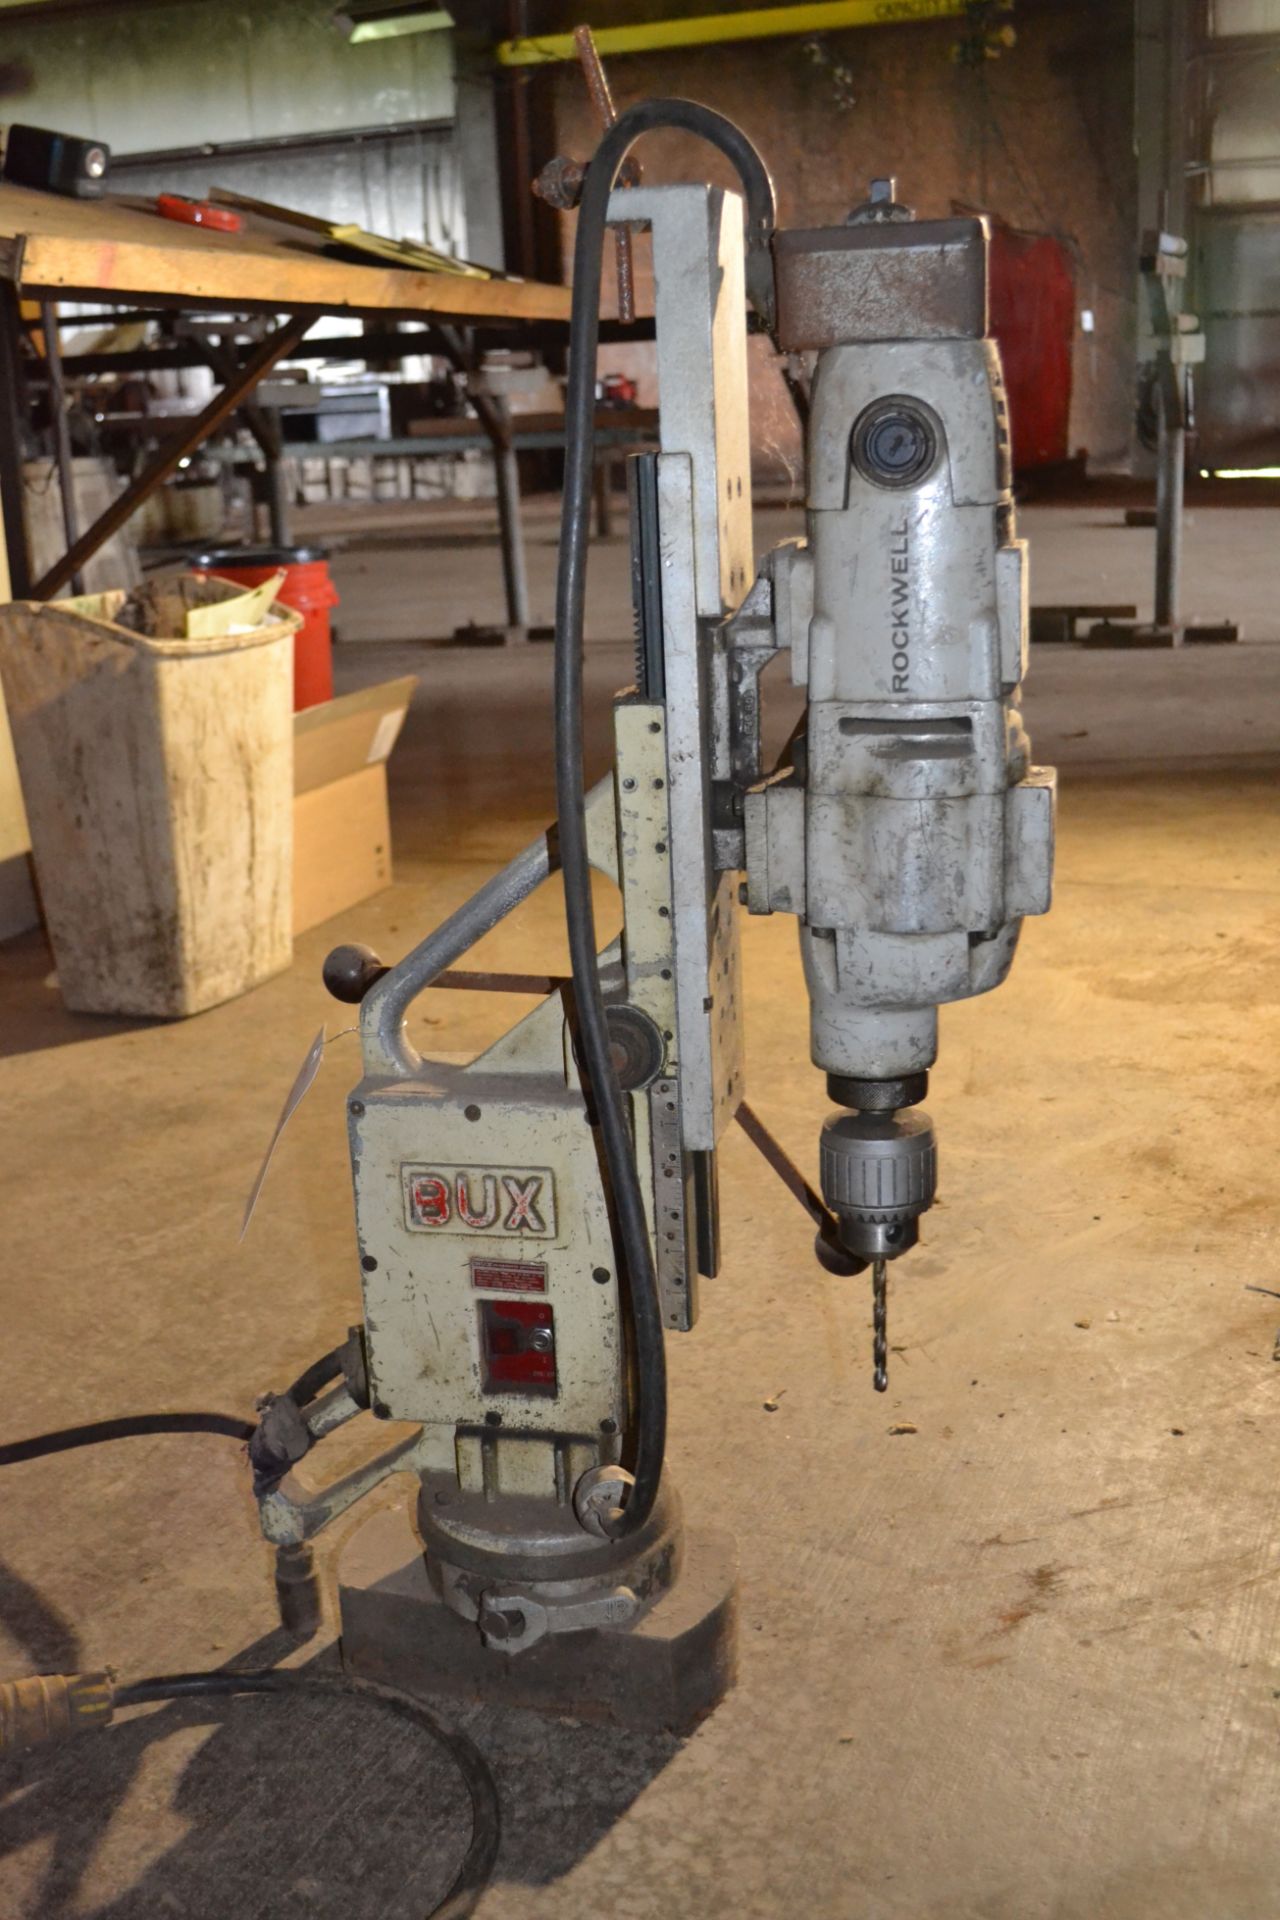 Rockwell BUX Model 77753 Portable Mag Drill - Image 4 of 5